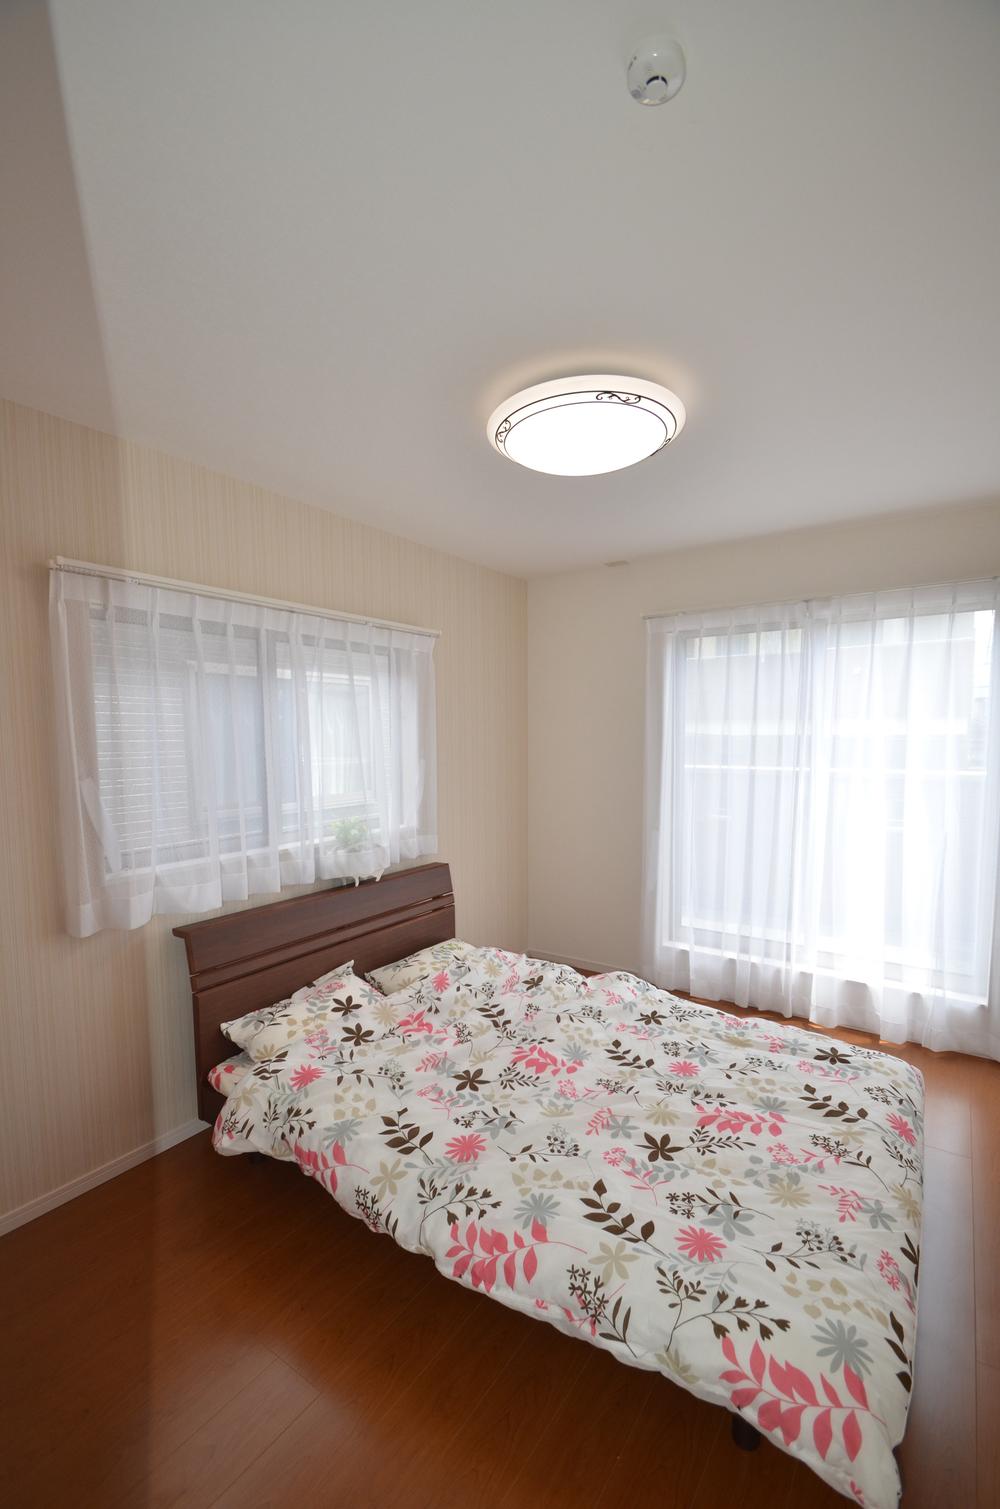 Other introspection. Second floor of the main bedroom is greeted in the morning and refreshing in the bright morning light in the two-sided lighting likely